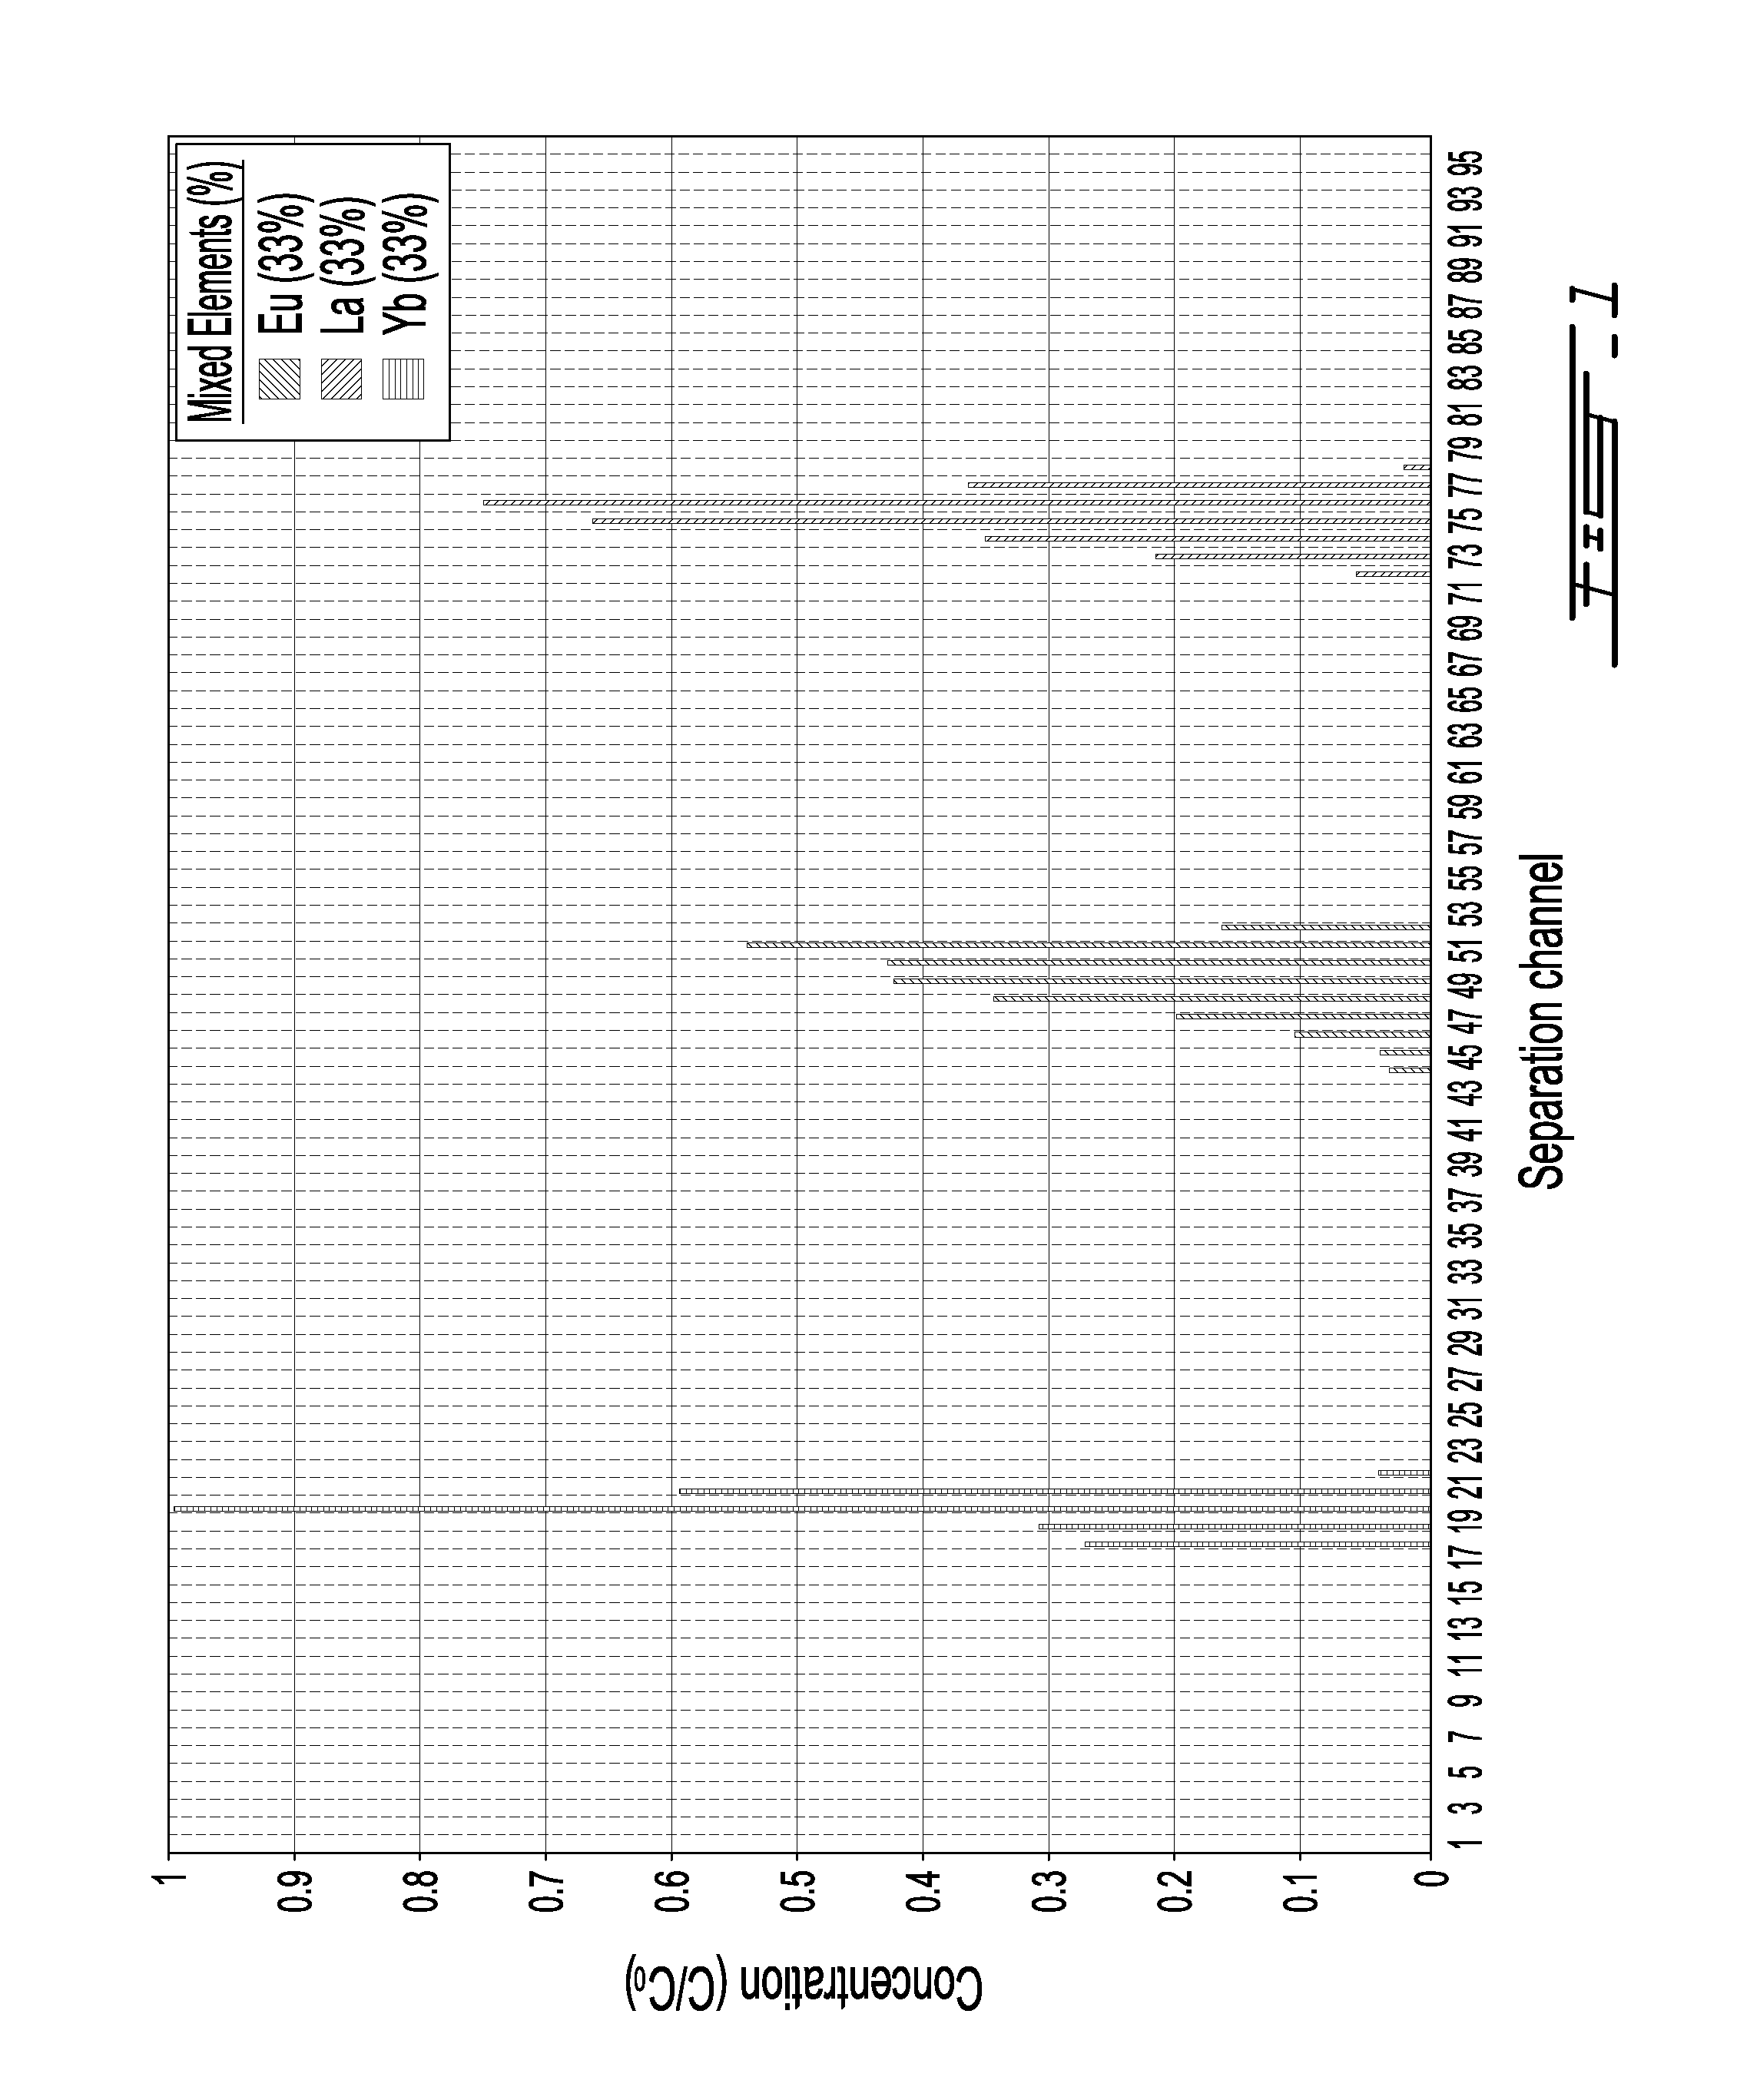 A system and method for separation and purification of dissolved rare earth/precious metals elements/compounds